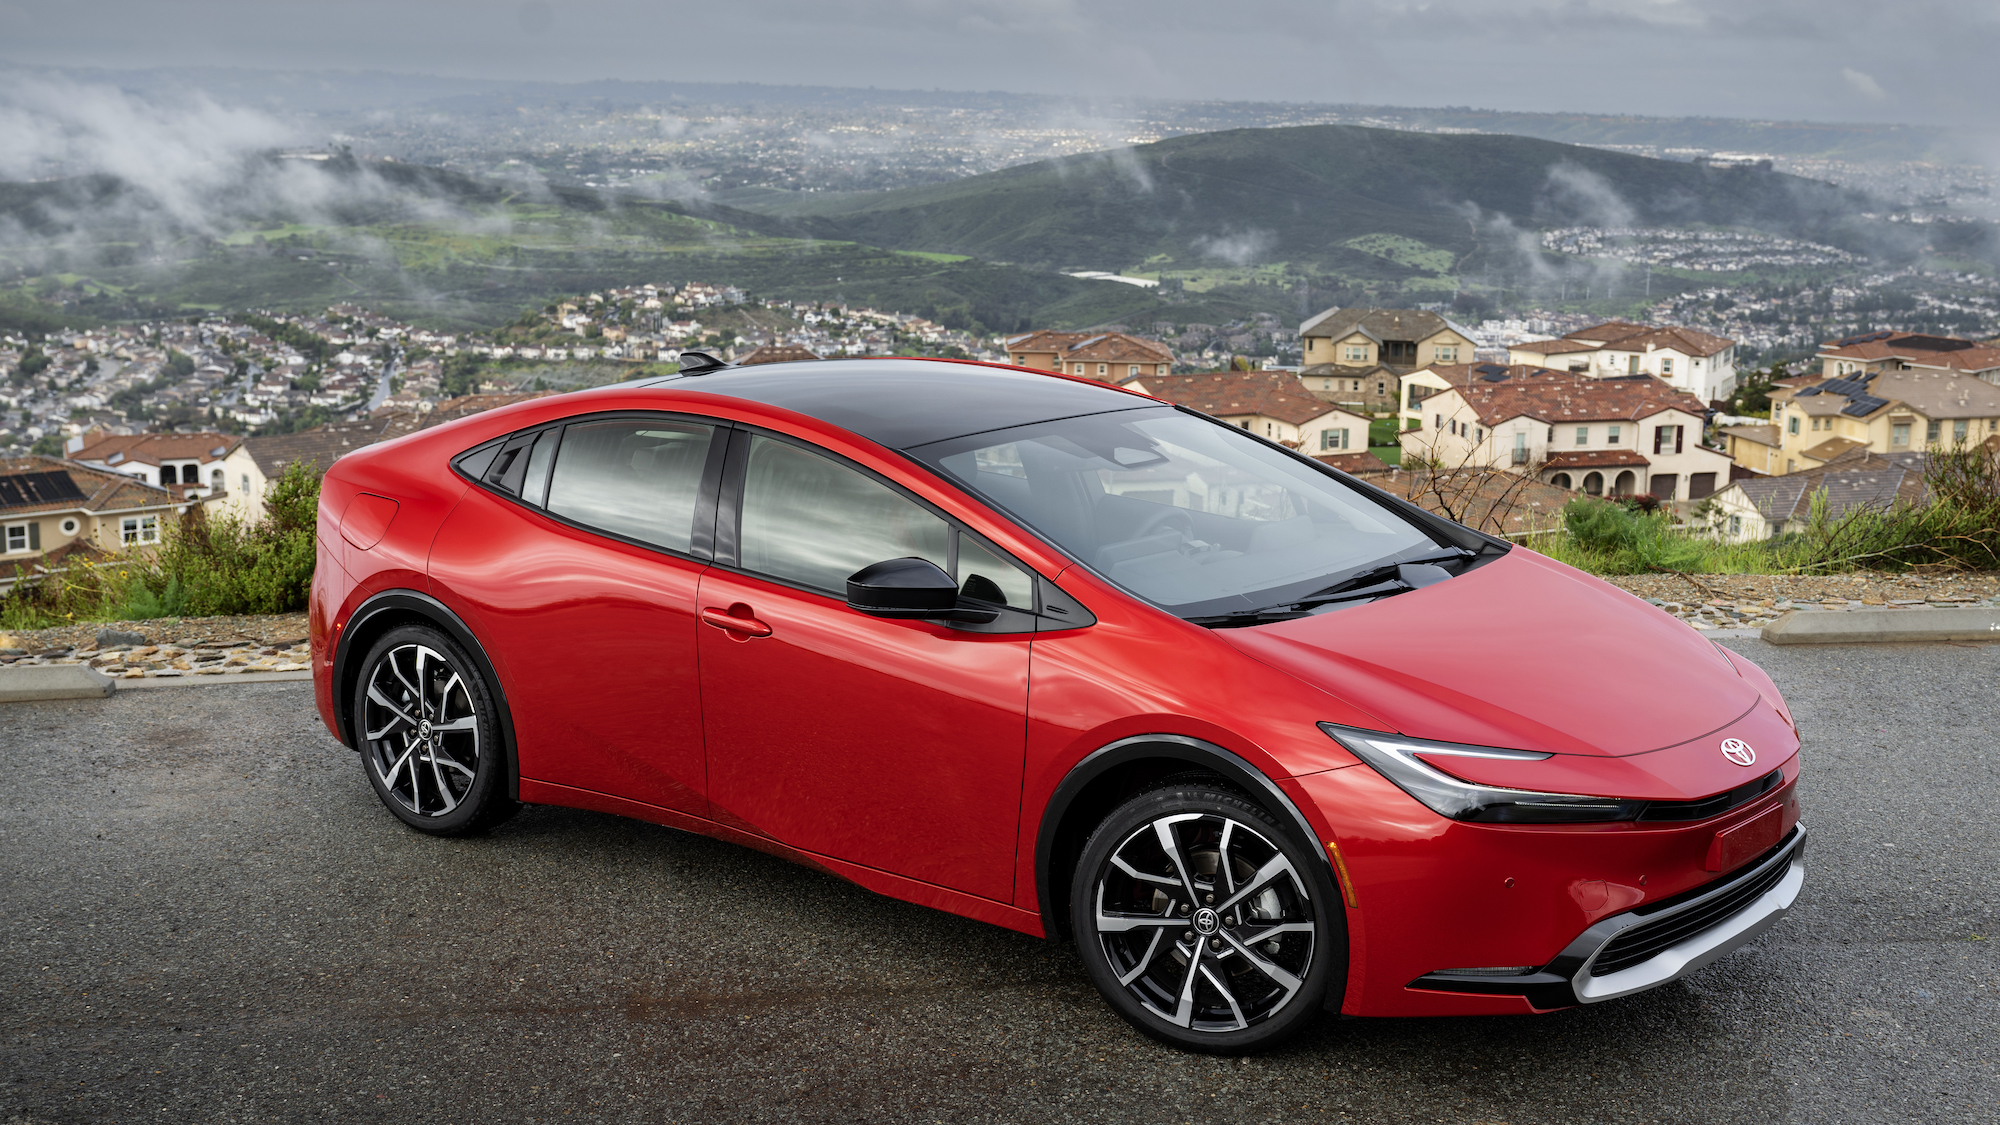 The Prius Prime XSE in Supersonic Red